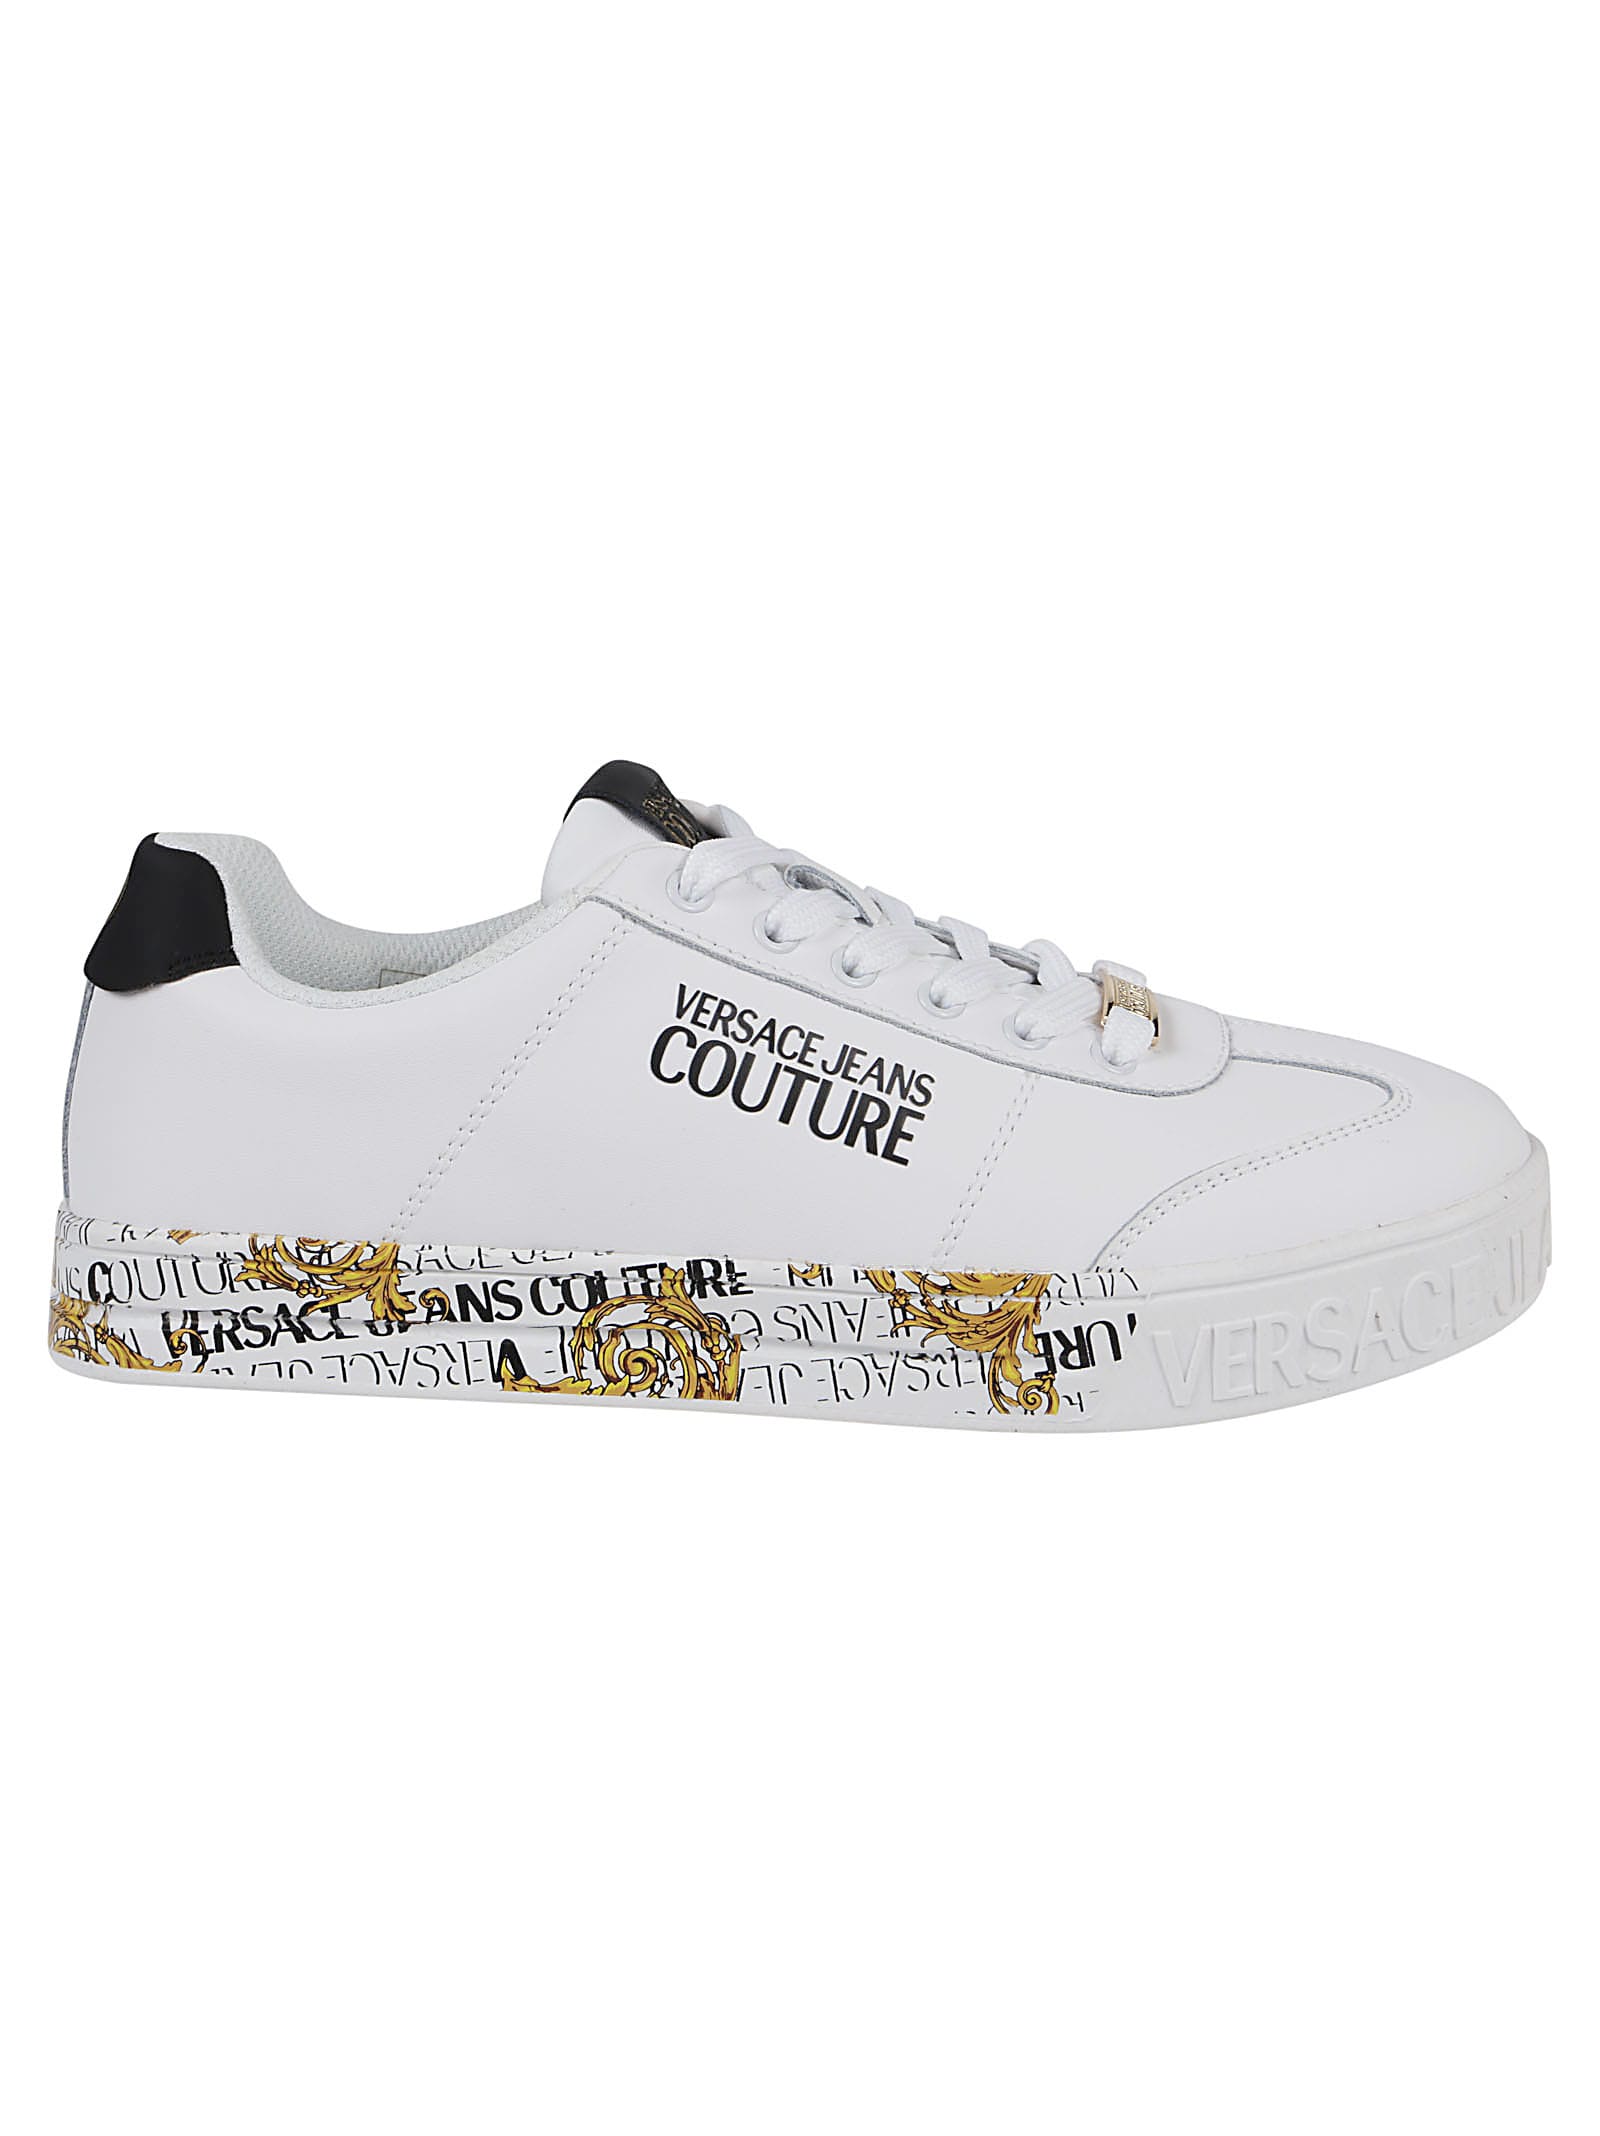 Versace Jeans Couture Fondo Court 88 Gummy Low Top Sneakers